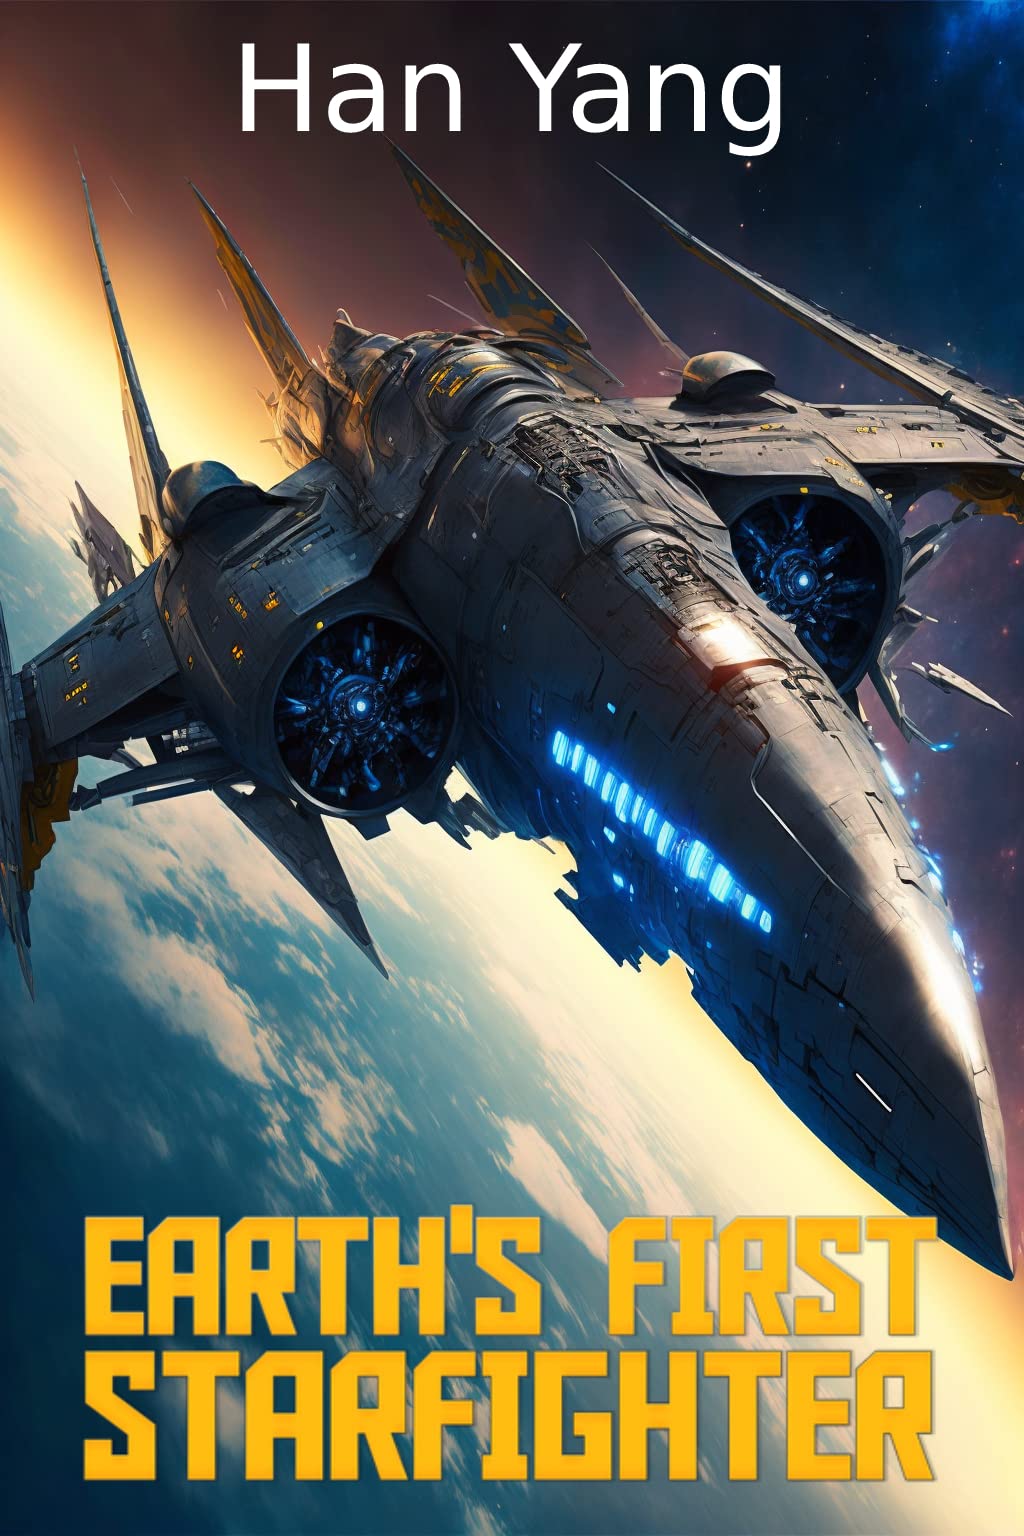 Earth's First StarFighter